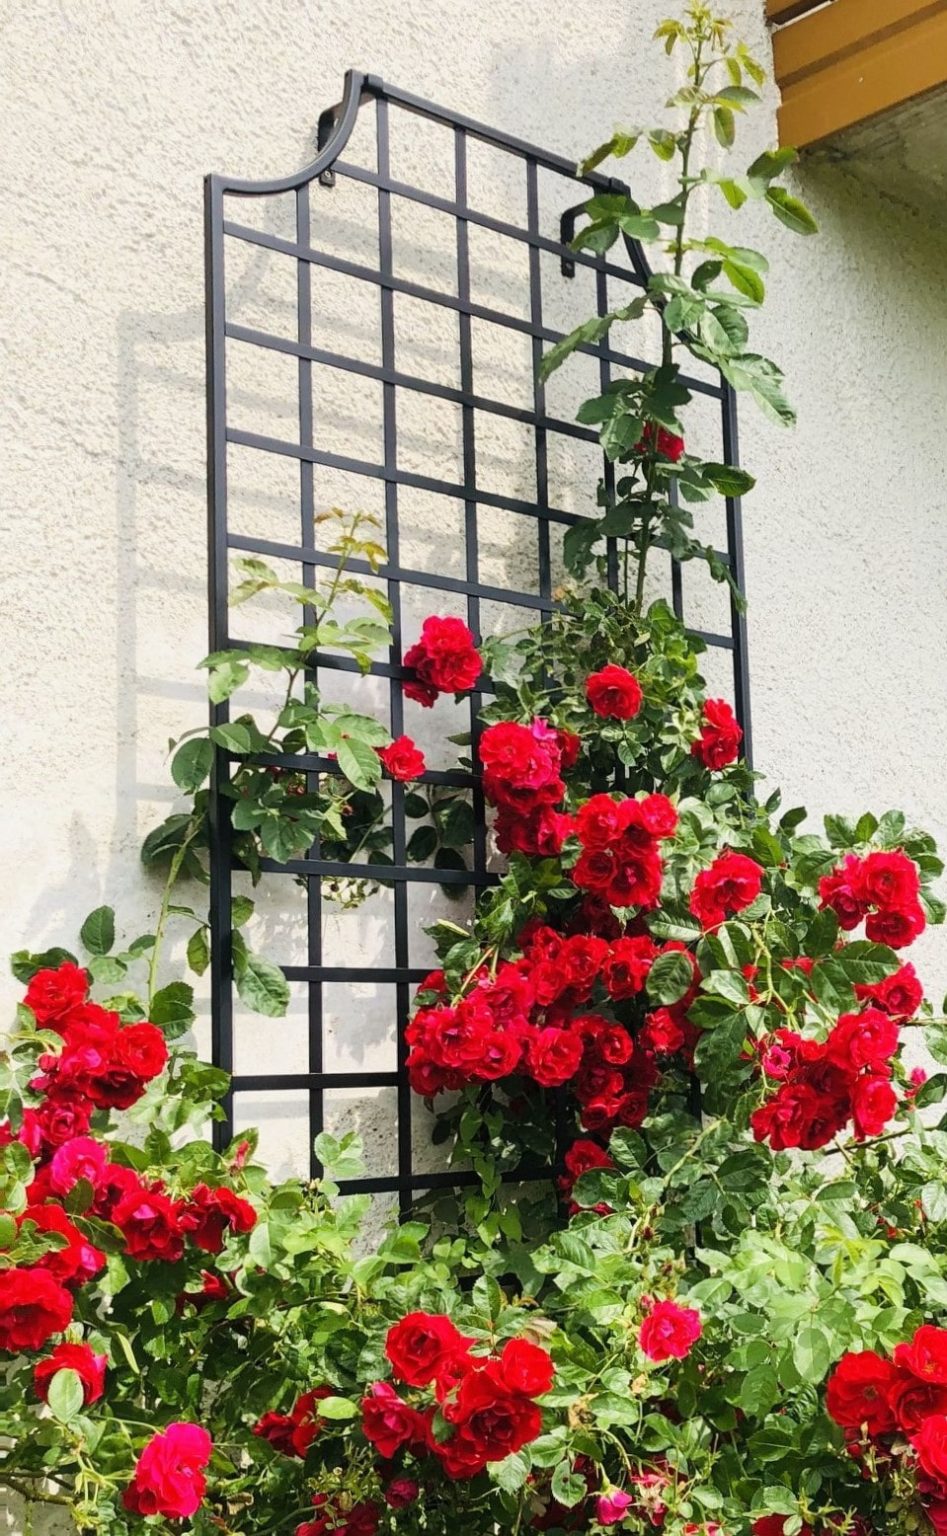 Garden trellis in eye-catching design, inspired by English country house